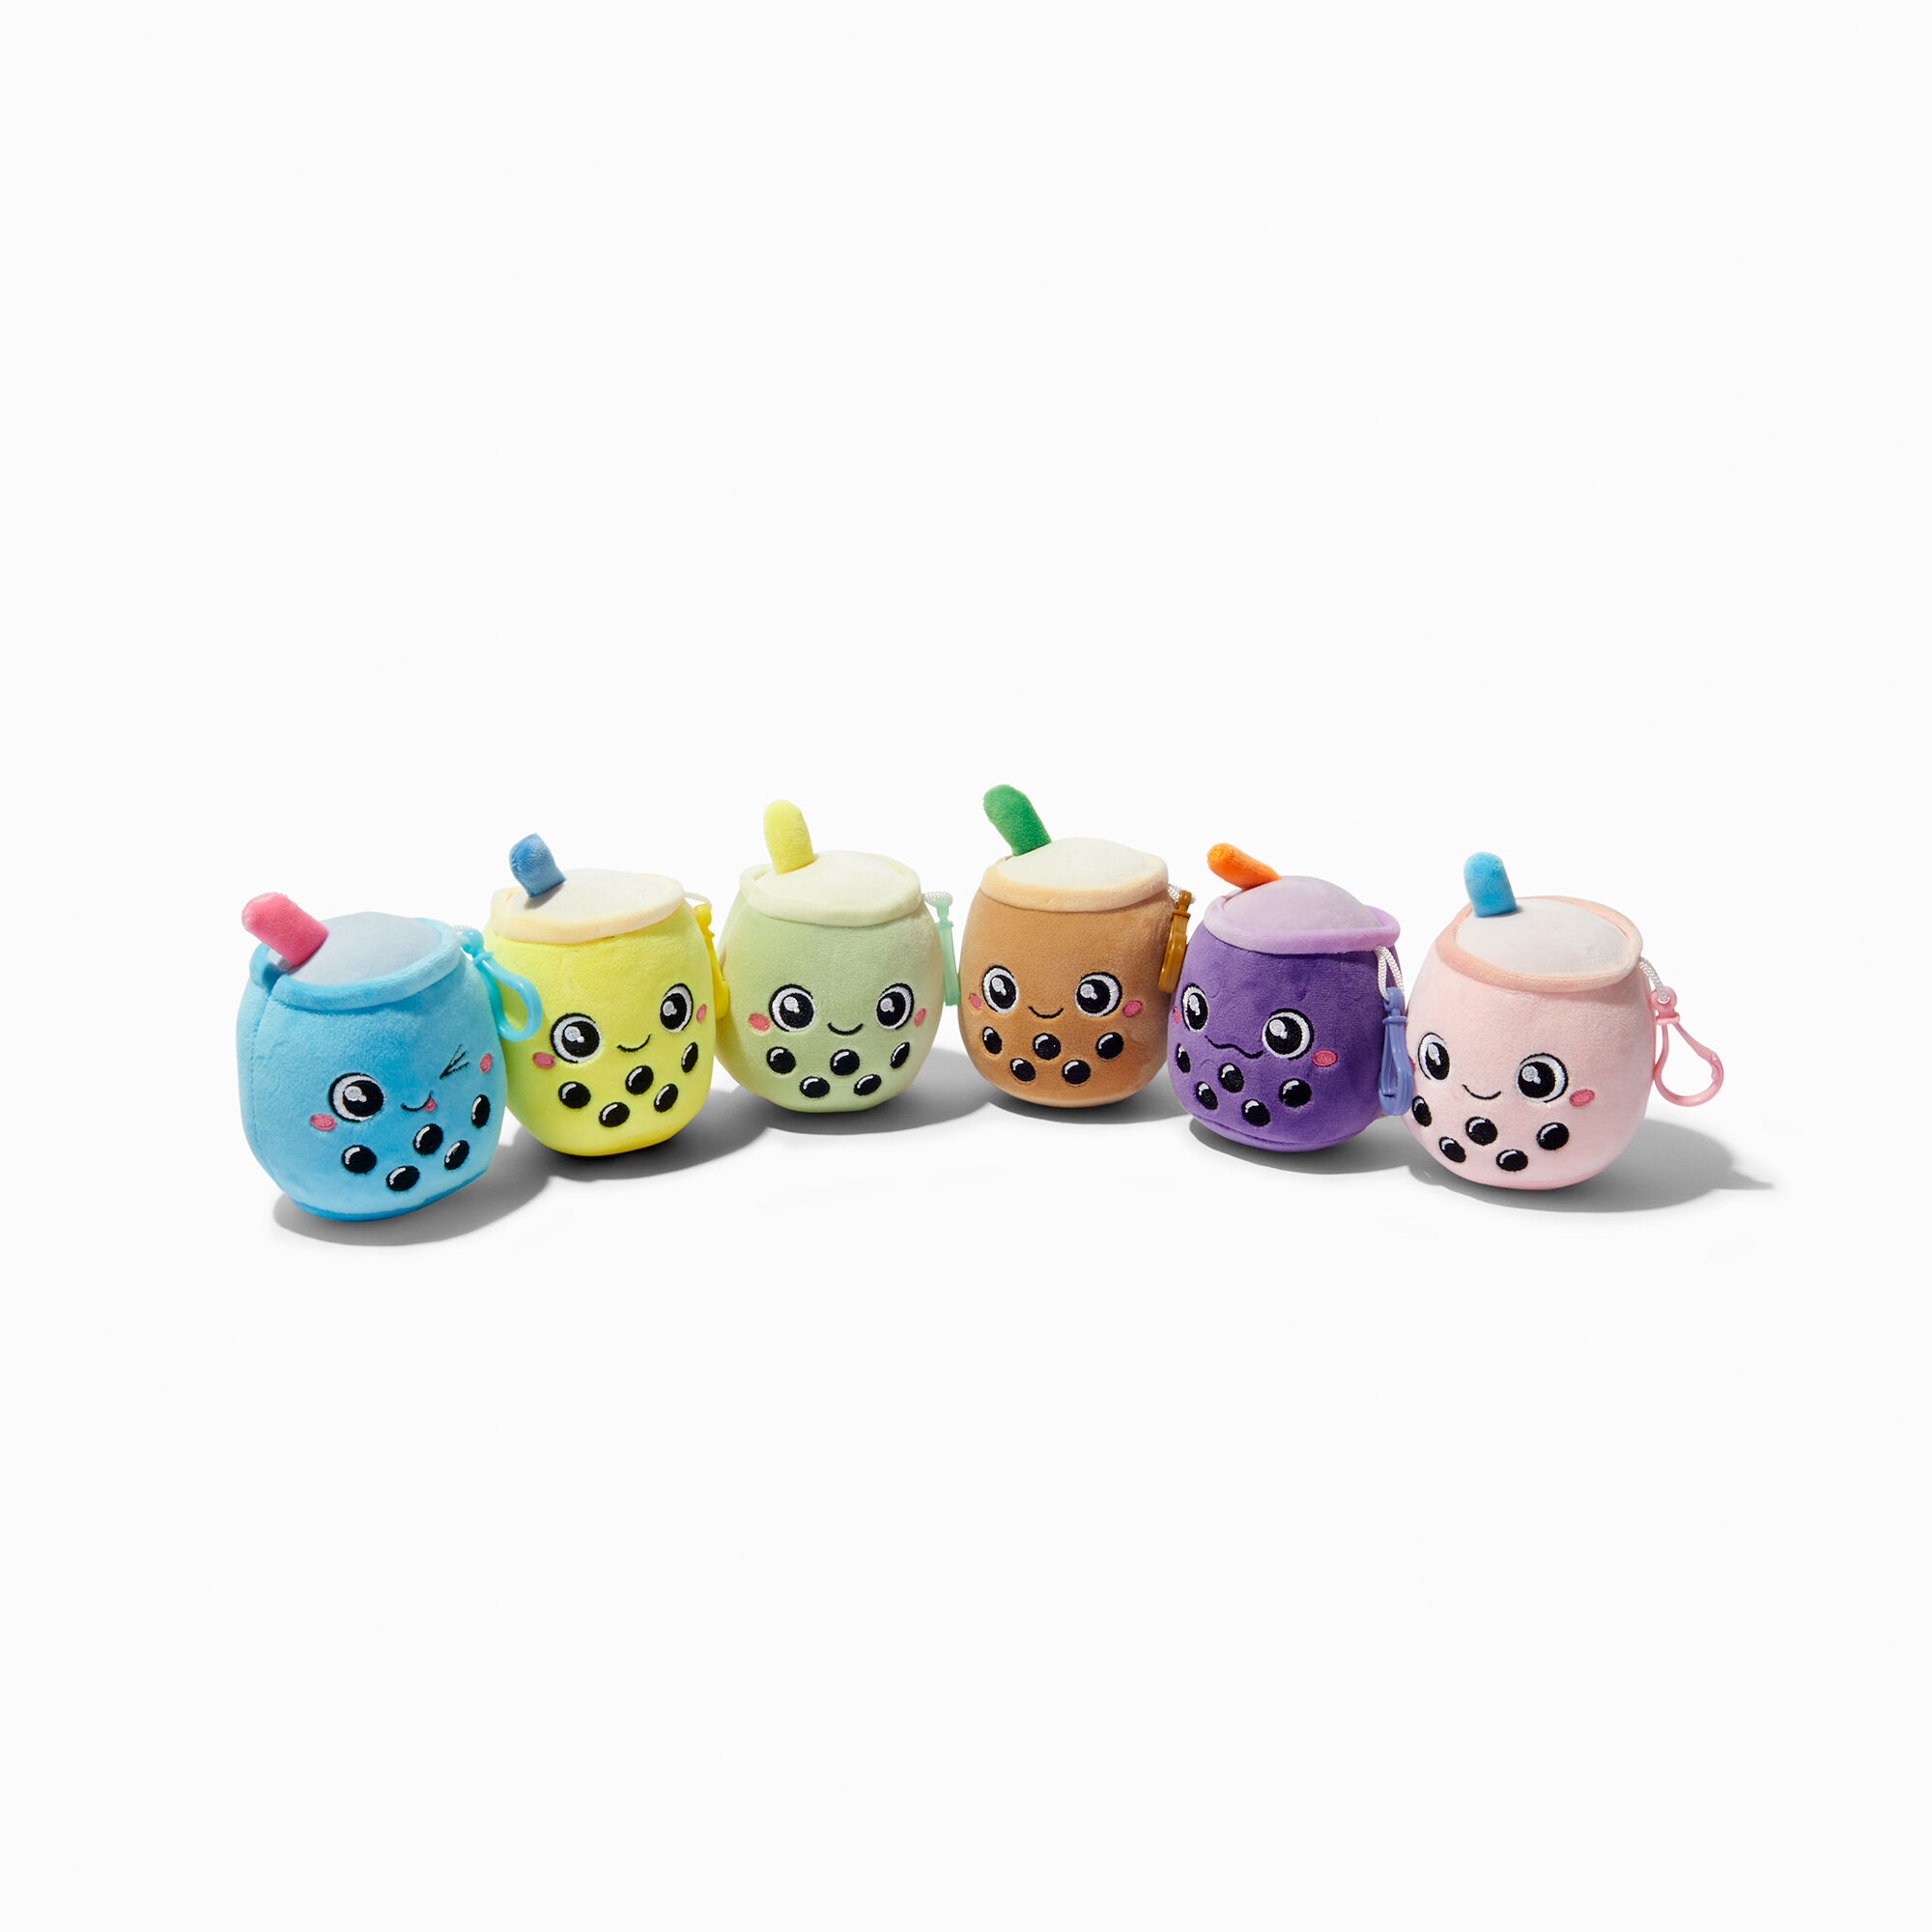 View Claires Bubble Tea Squishy Keyrings Styles Vary information